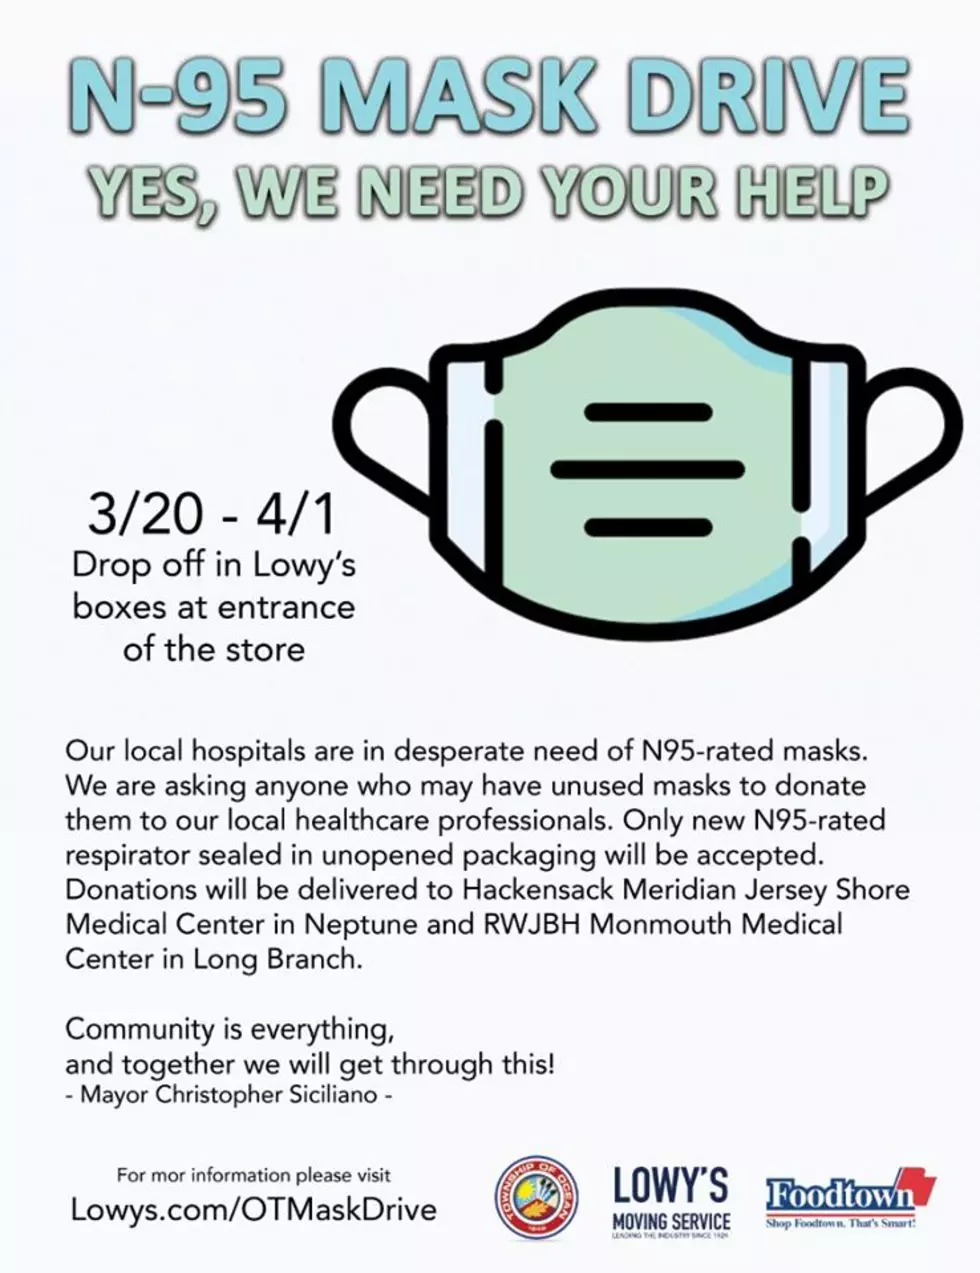 Lowy’s Moving Company Organizing N95 Mask Drive Throughout JS